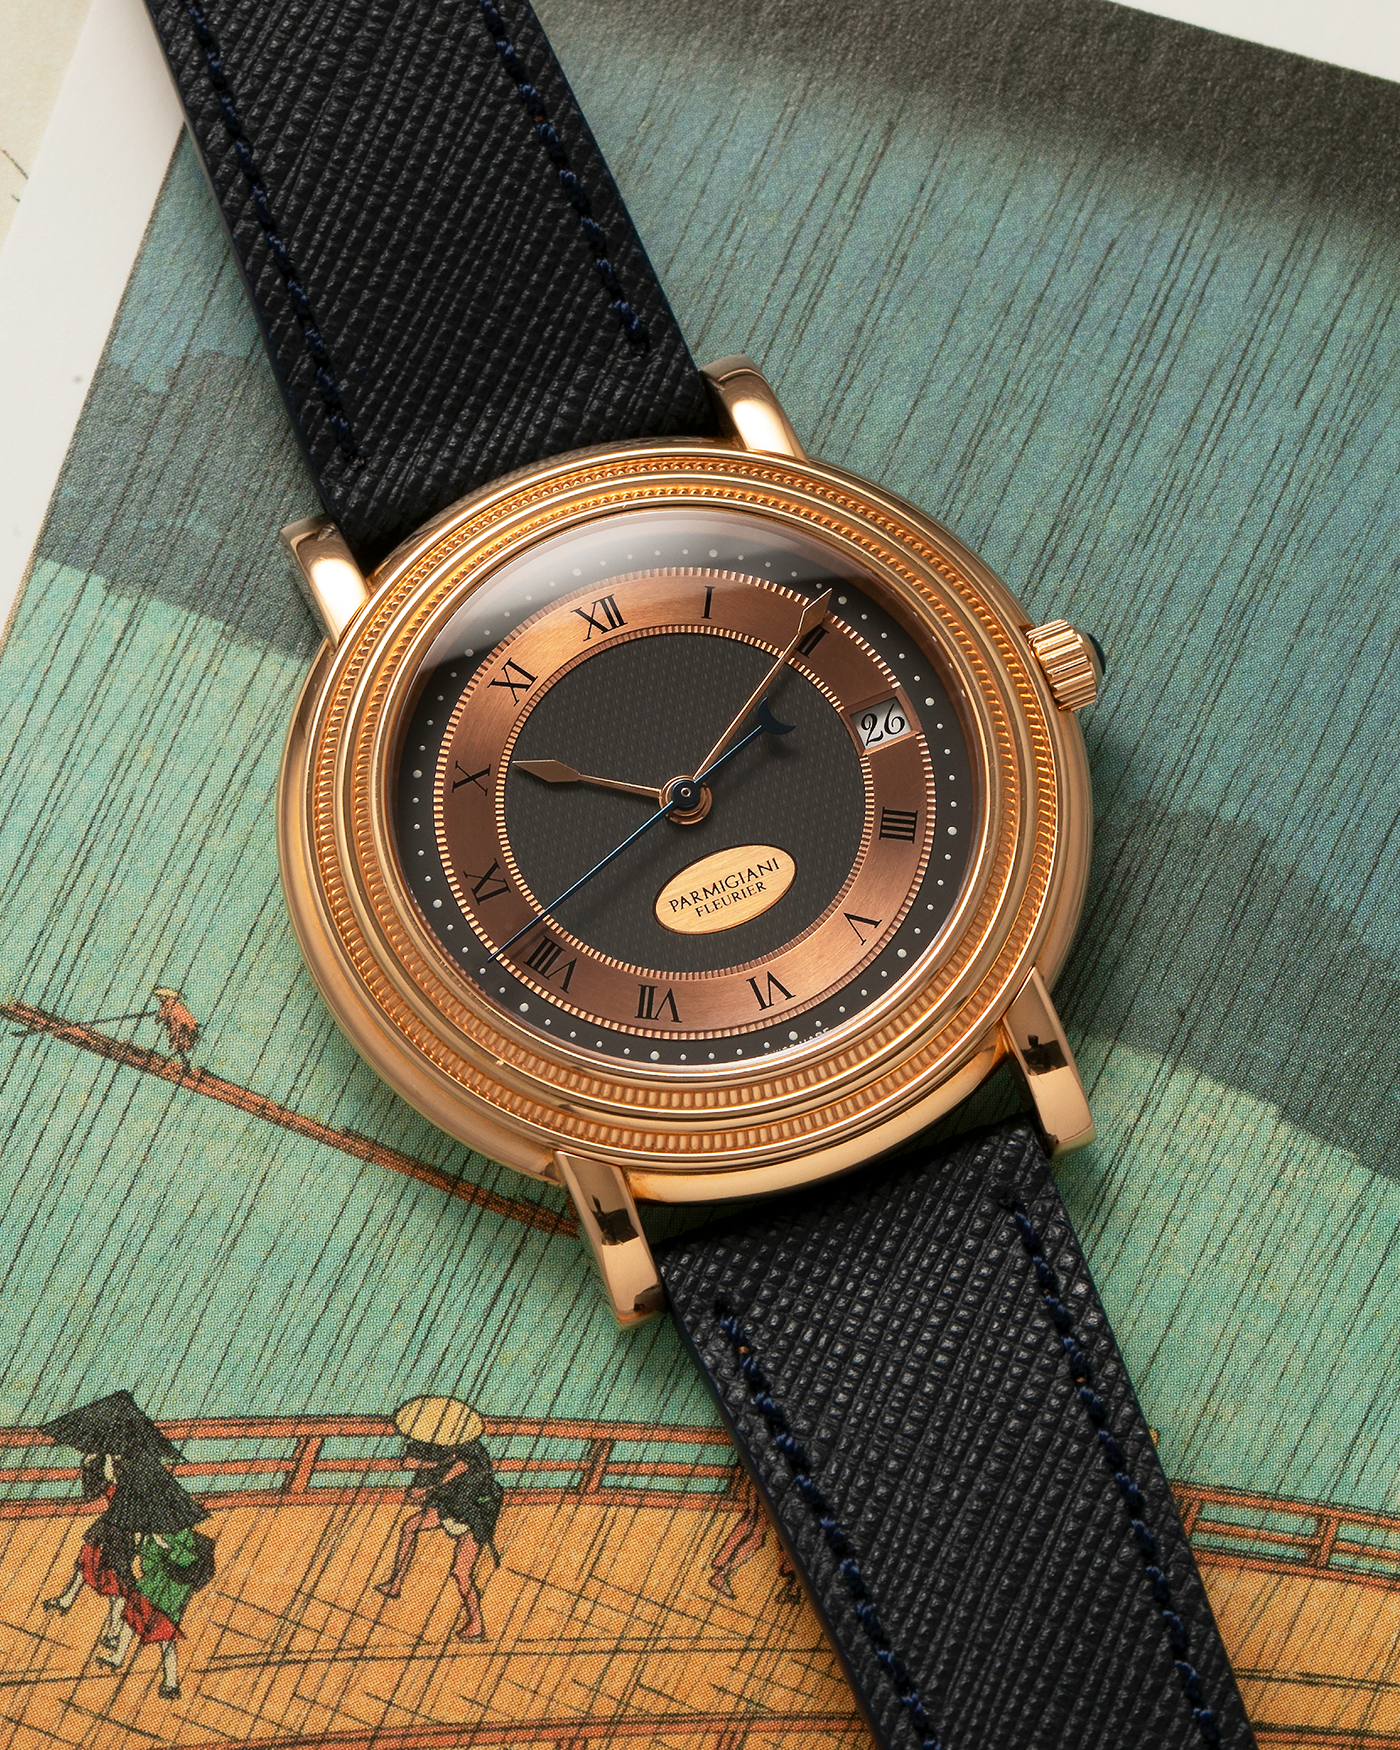 Brand: Parmigiani Fleurier Year: 1990’s Model: Toric Automatic Material: 18-carat Rose Gold Movement: PF Cal. 13301, Self-Winding Case Diameter: 40mm Lug Width: 20mm Strap: Molequin Navy Textured Calf Leather Strap with Signed 18-carat Rose Gold Tang Buckle